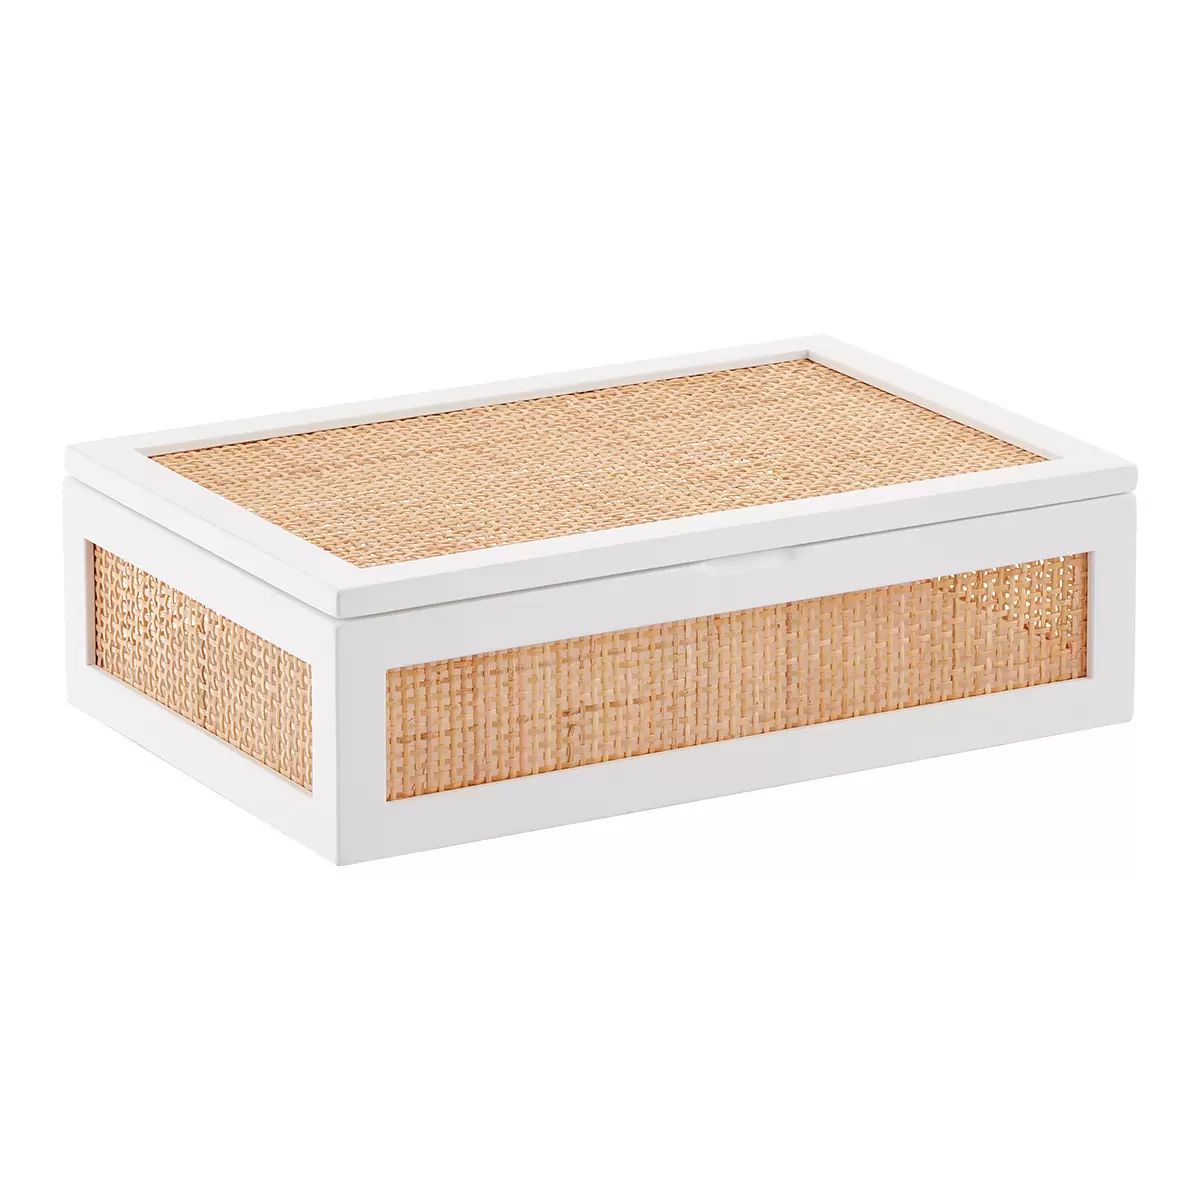 The Container Store Artisan Rattan Cane Hinged Lid Box | The Container Store